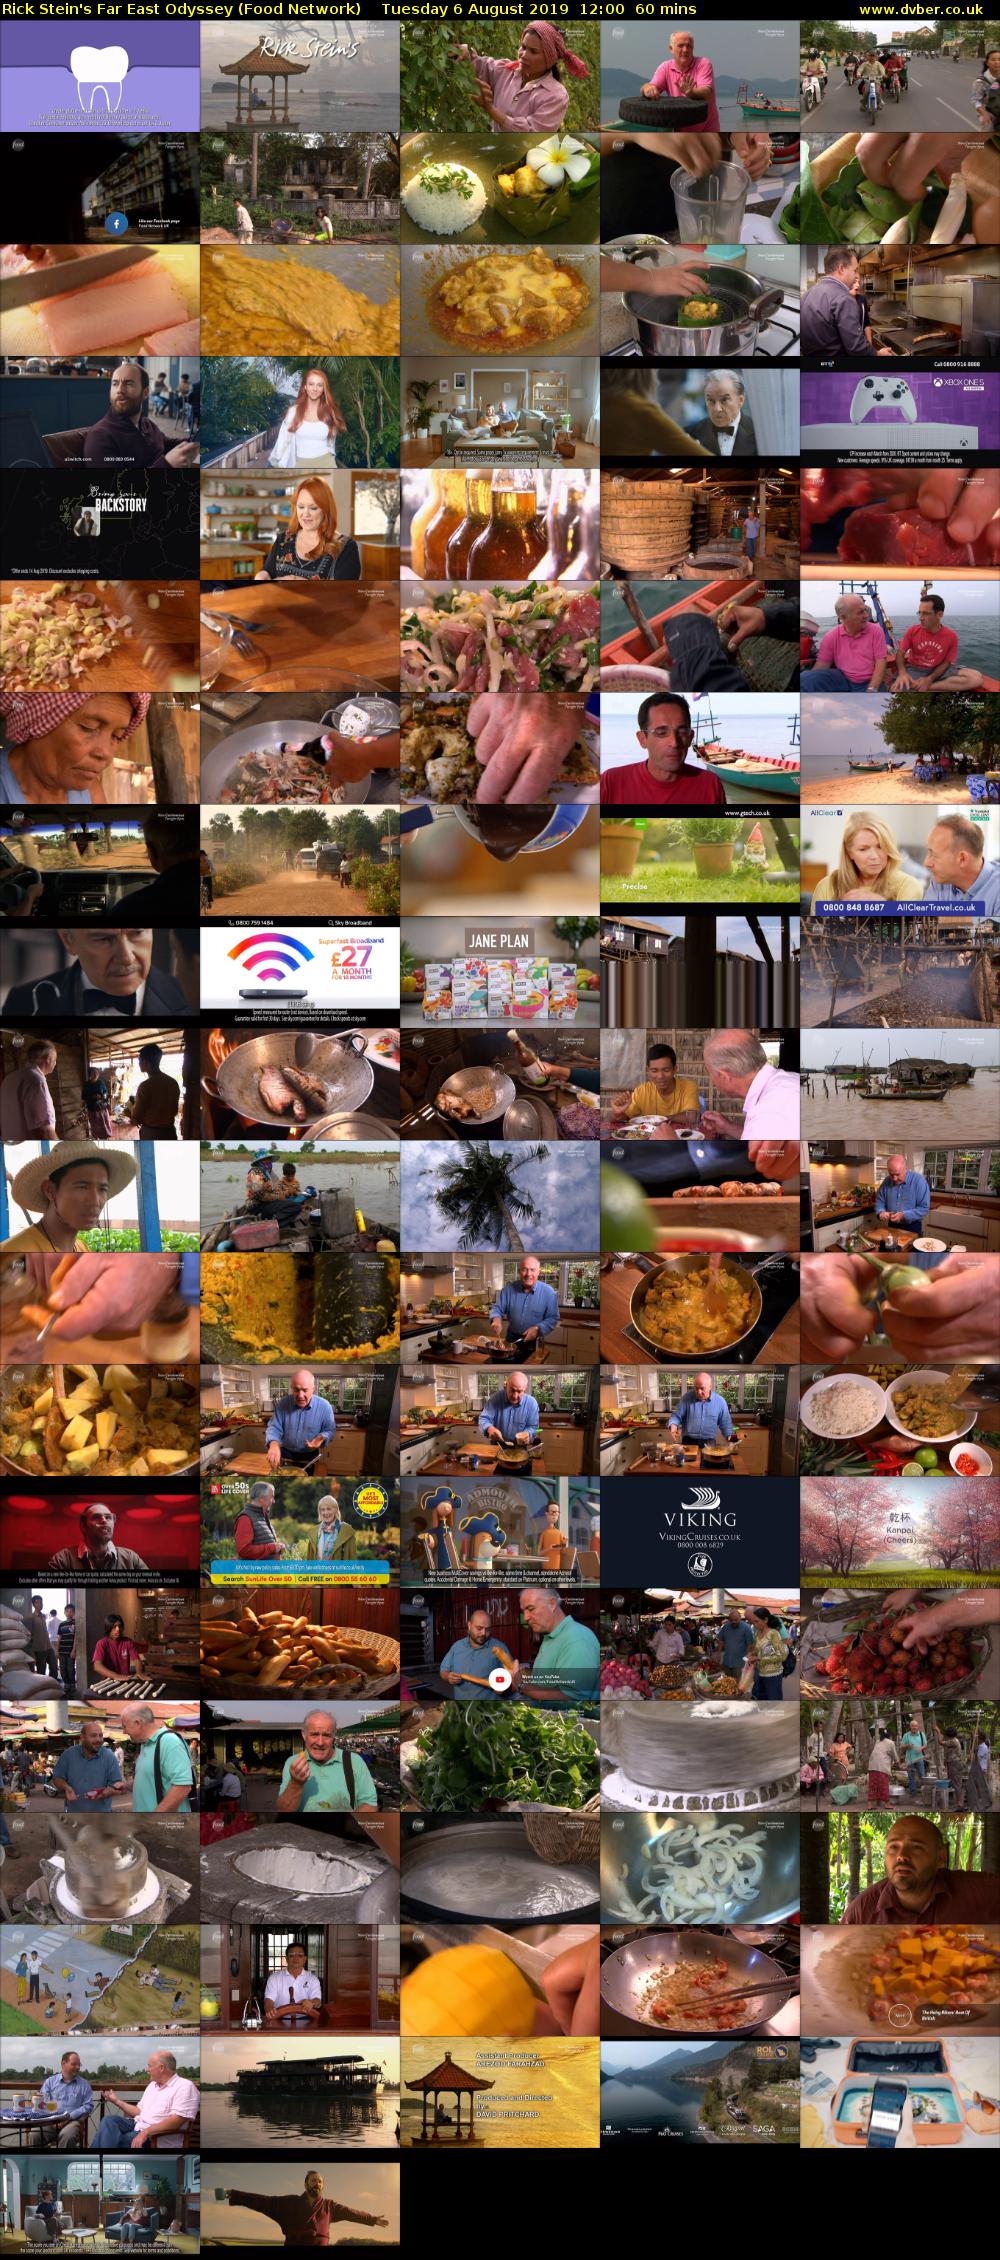 Rick Stein's Far East Odyssey (Food Network) Tuesday 6 August 2019 12:00 - 13:00